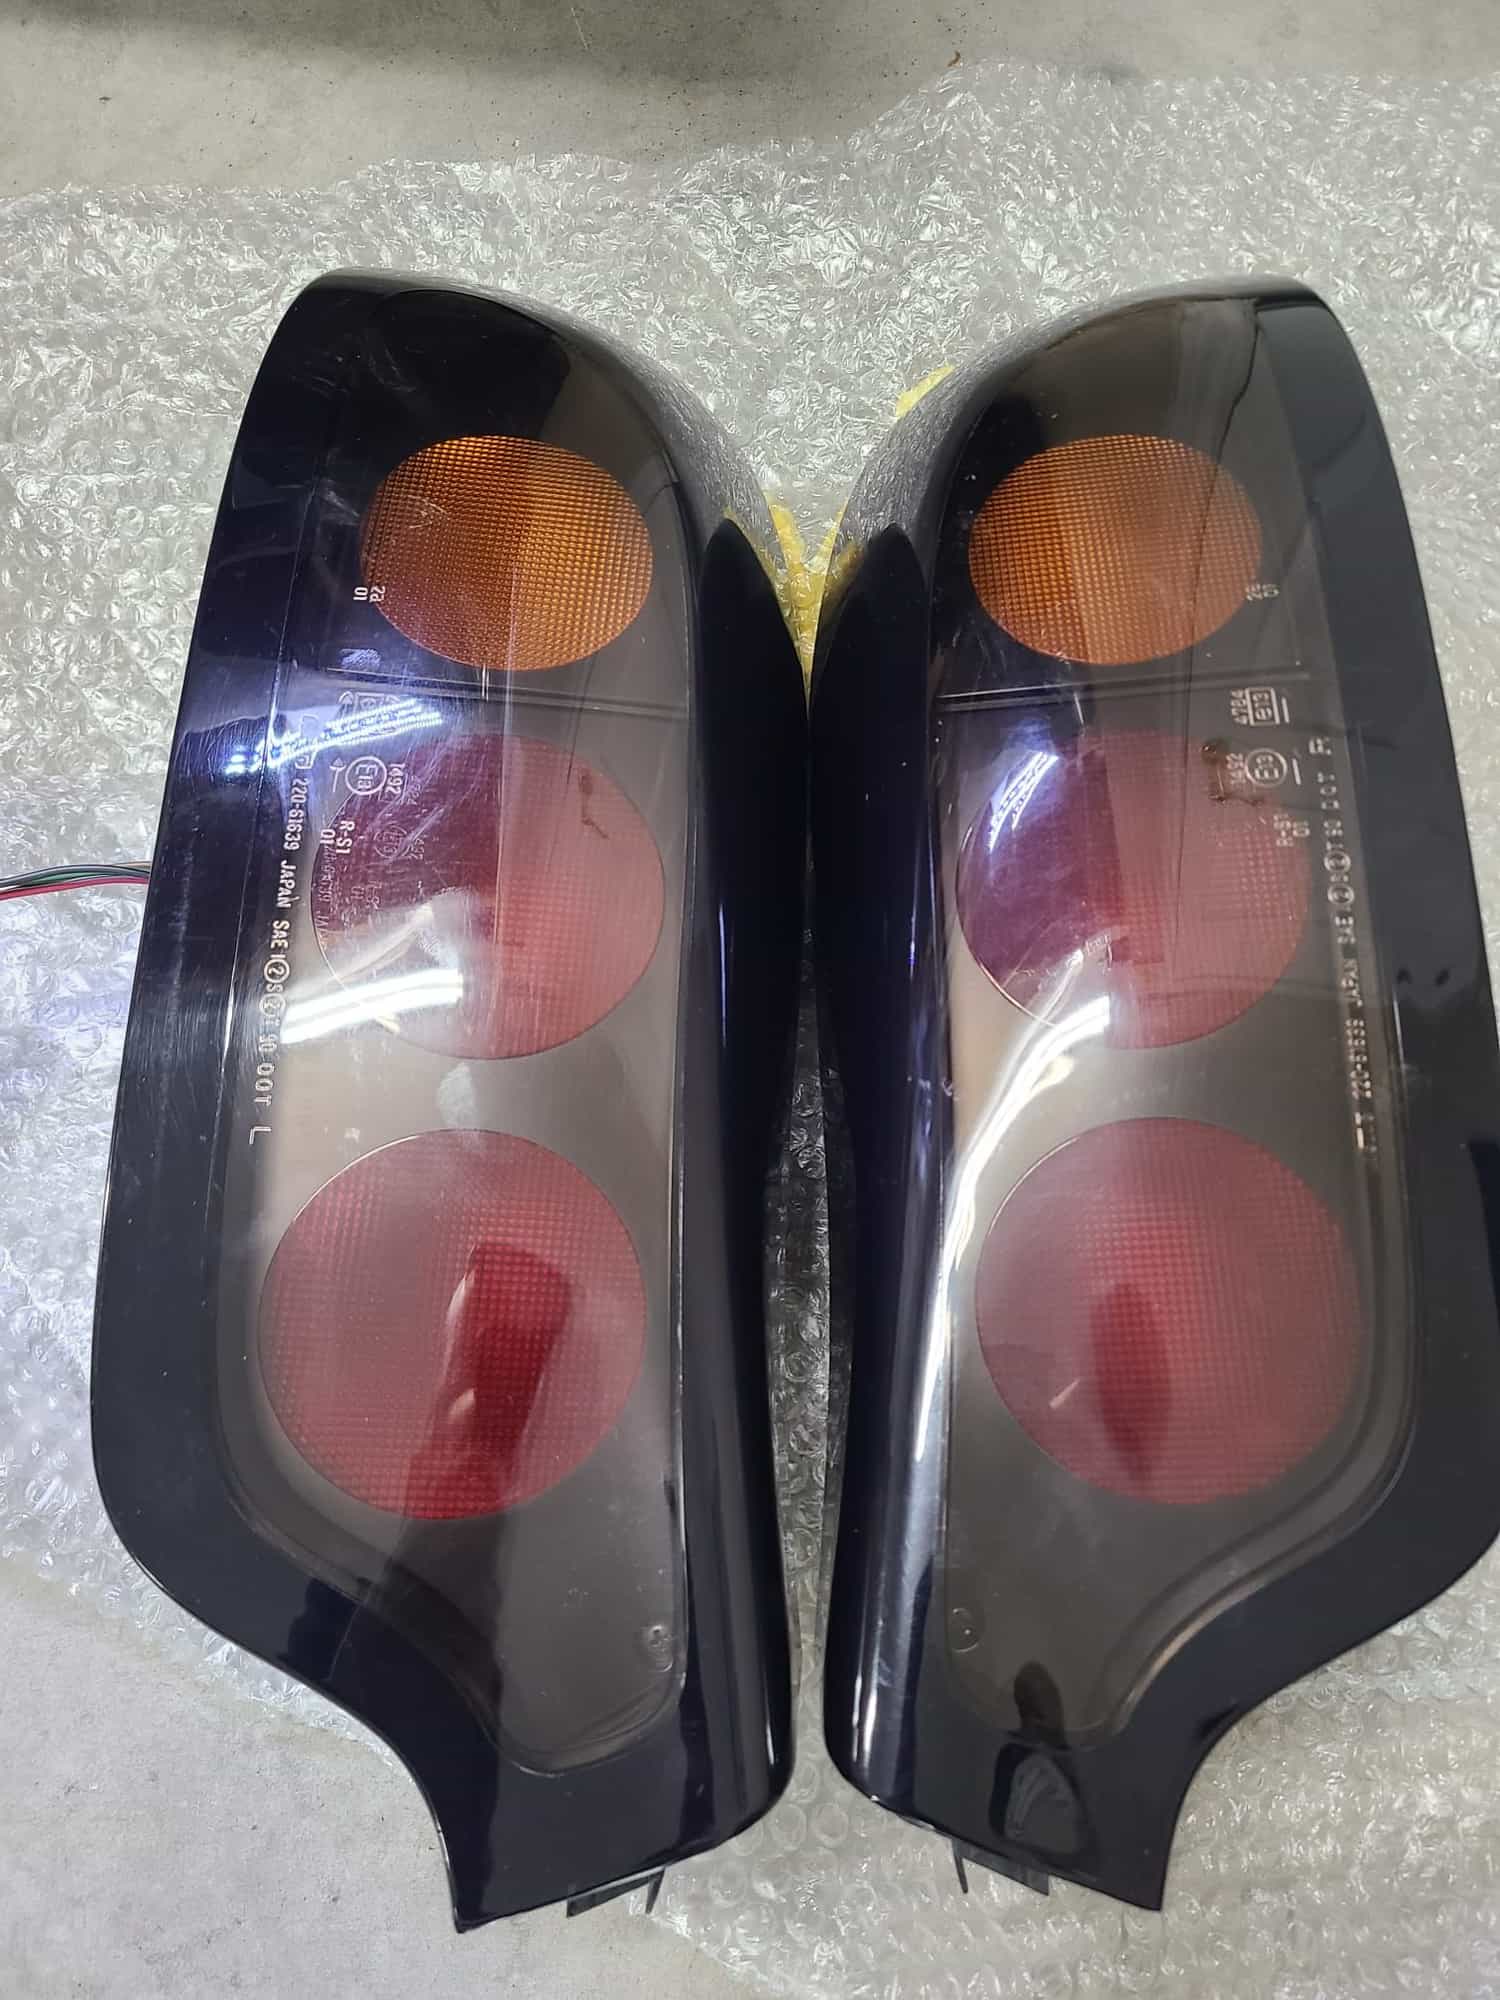 Miscellaneous - 99 Tail Lights $850 - Used - 1999 to 2002 Mazda RX-7 - Richmond Hill, ON L4E3Y6, Canada